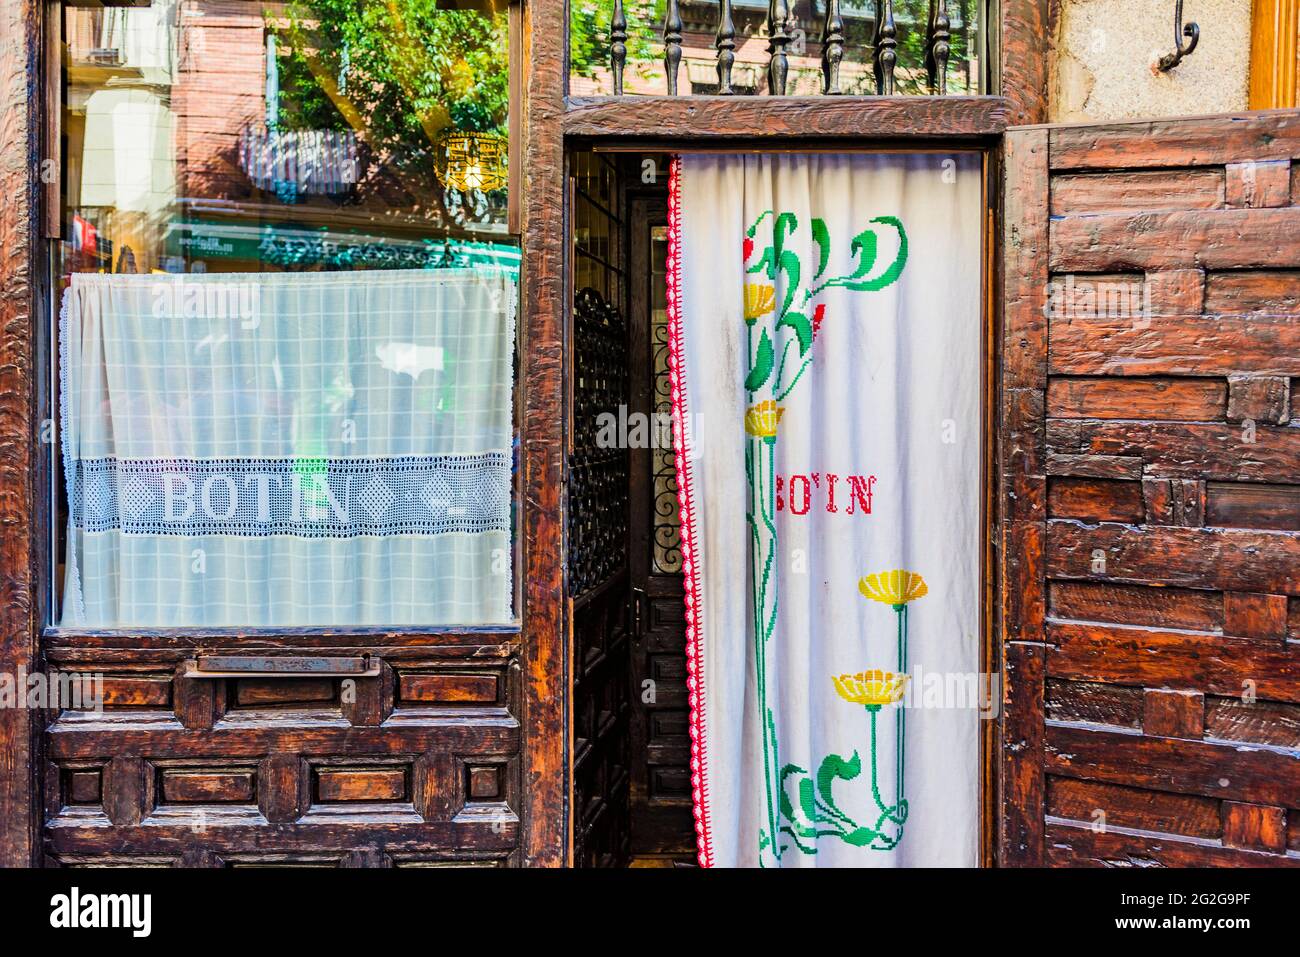 Facade detail. Sobrino de Botín is a Spanish restaurant in Madrid, founded in 1725,that is the oldest restaurant in the world in continuous operation. Stock Photo